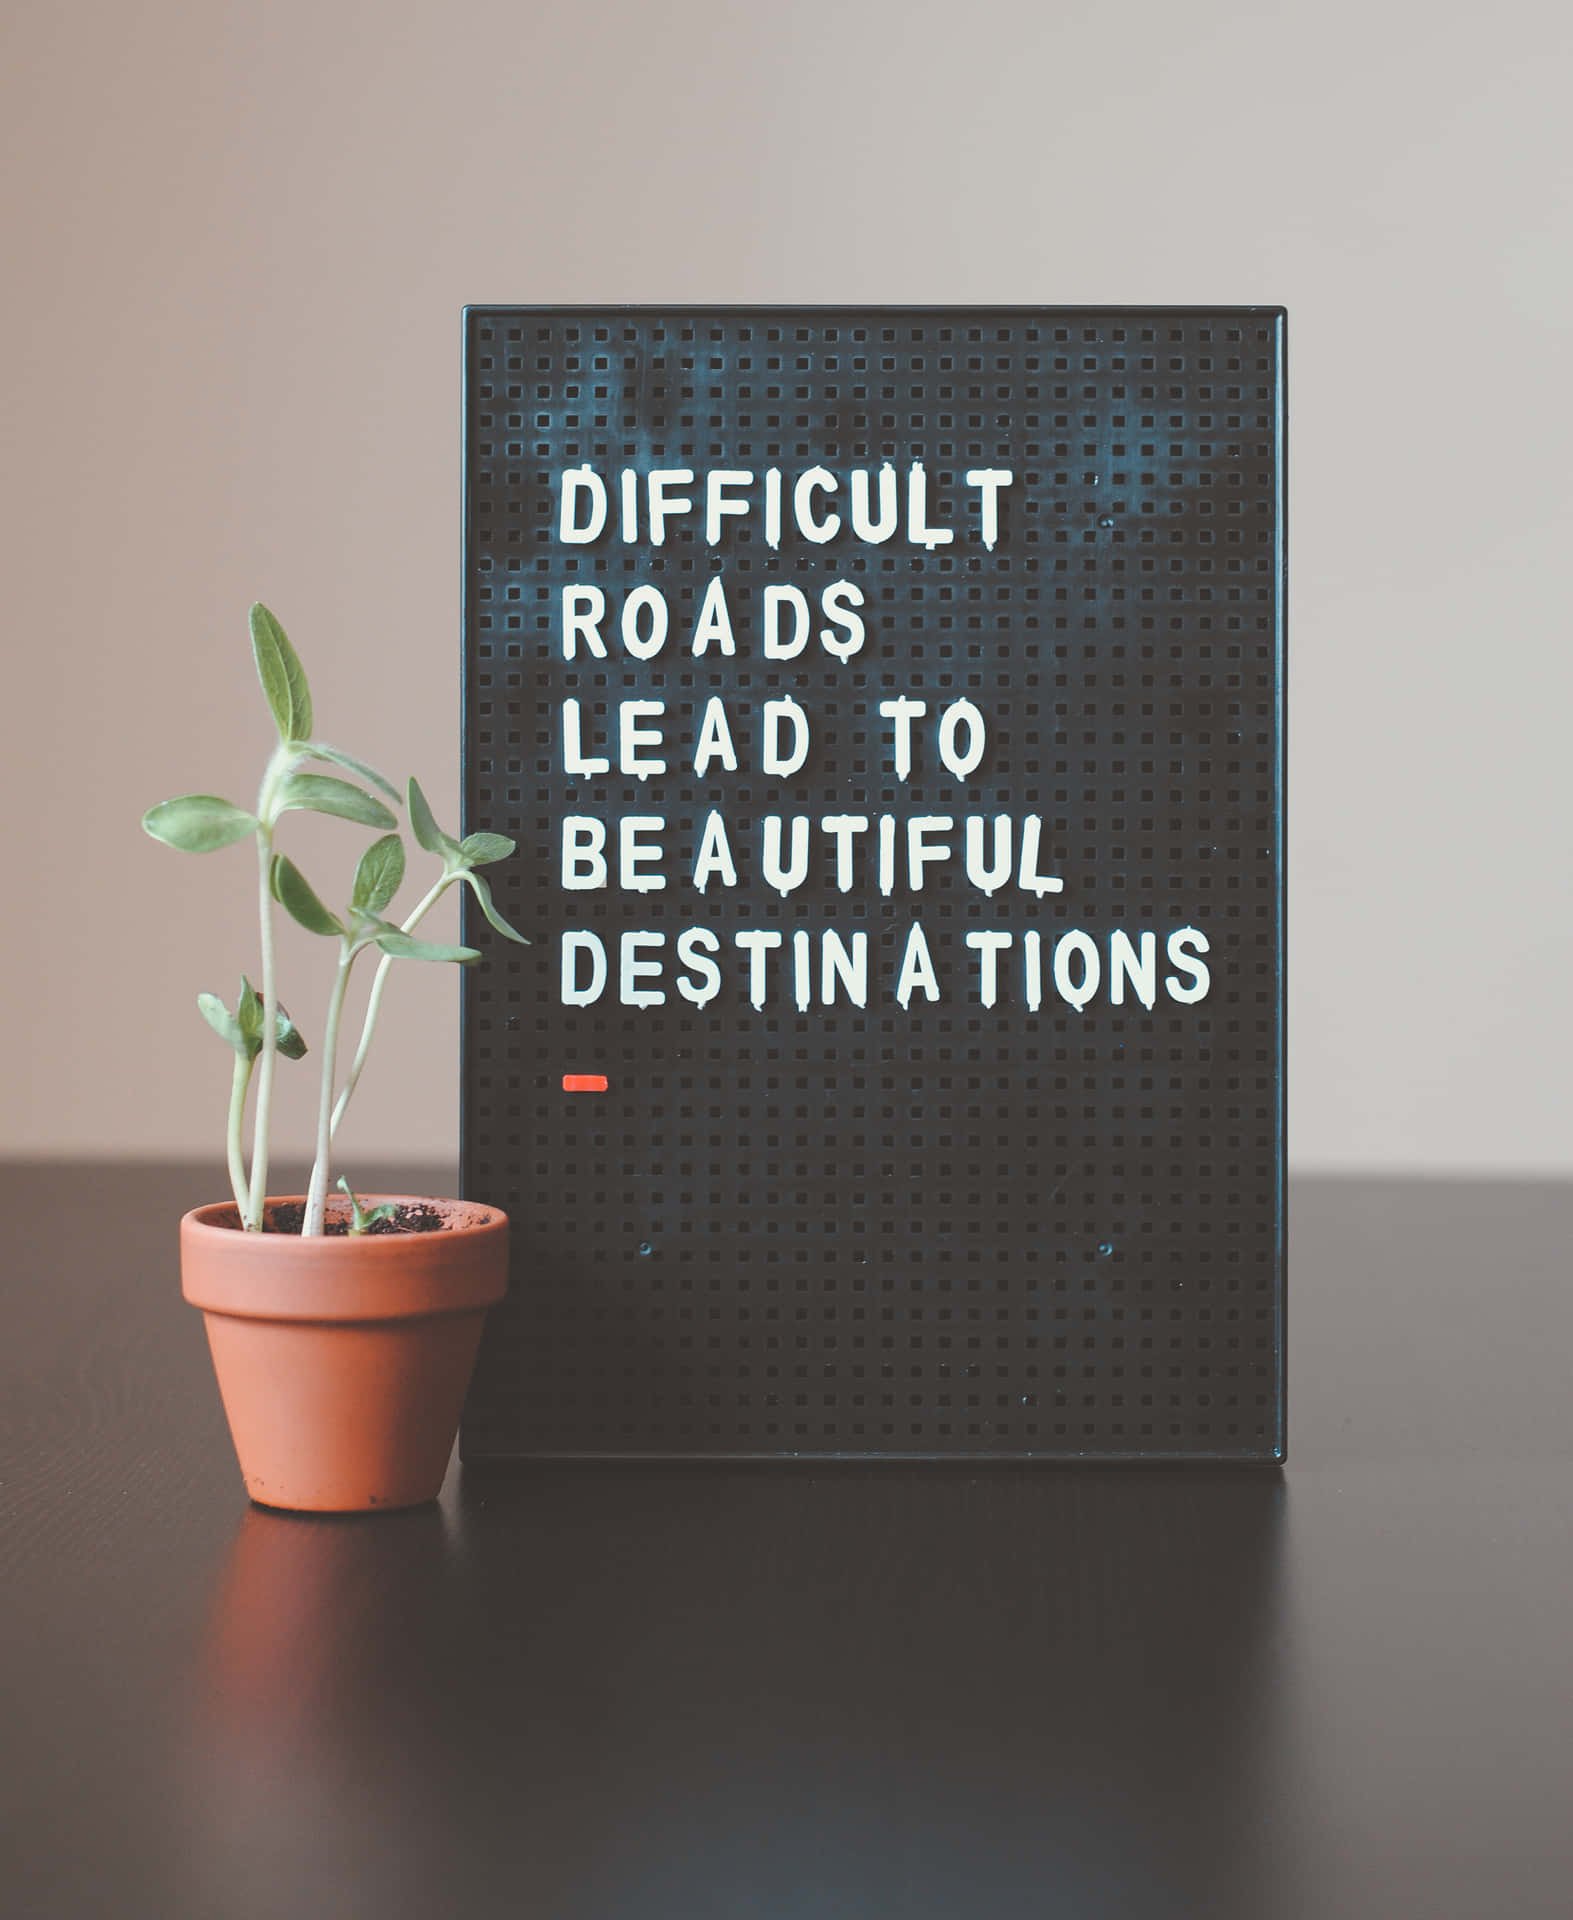 Message Difficult Roads Lead To Beautiful Destinations Wallpaper